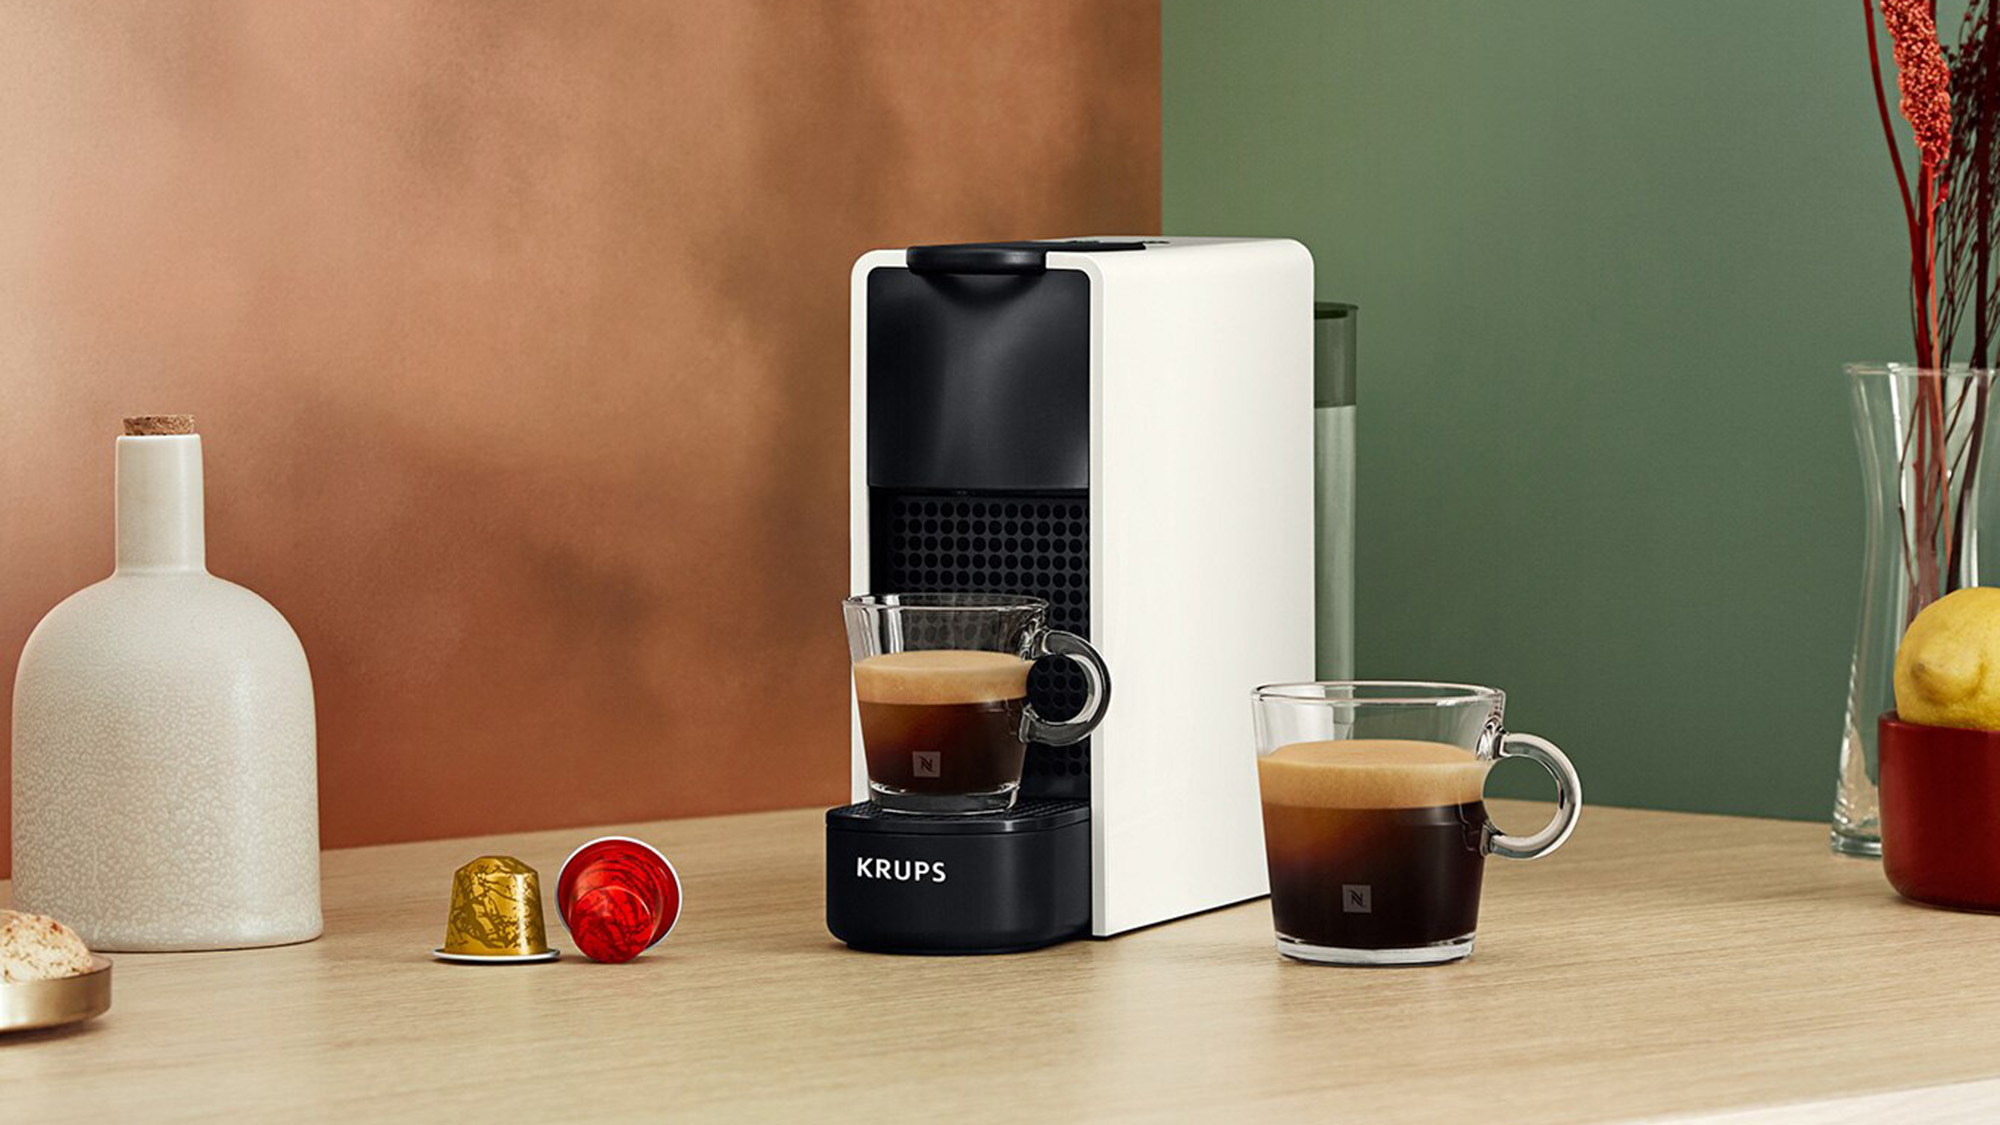 Nespresso Pixie Review  The right pod coffee machine for you